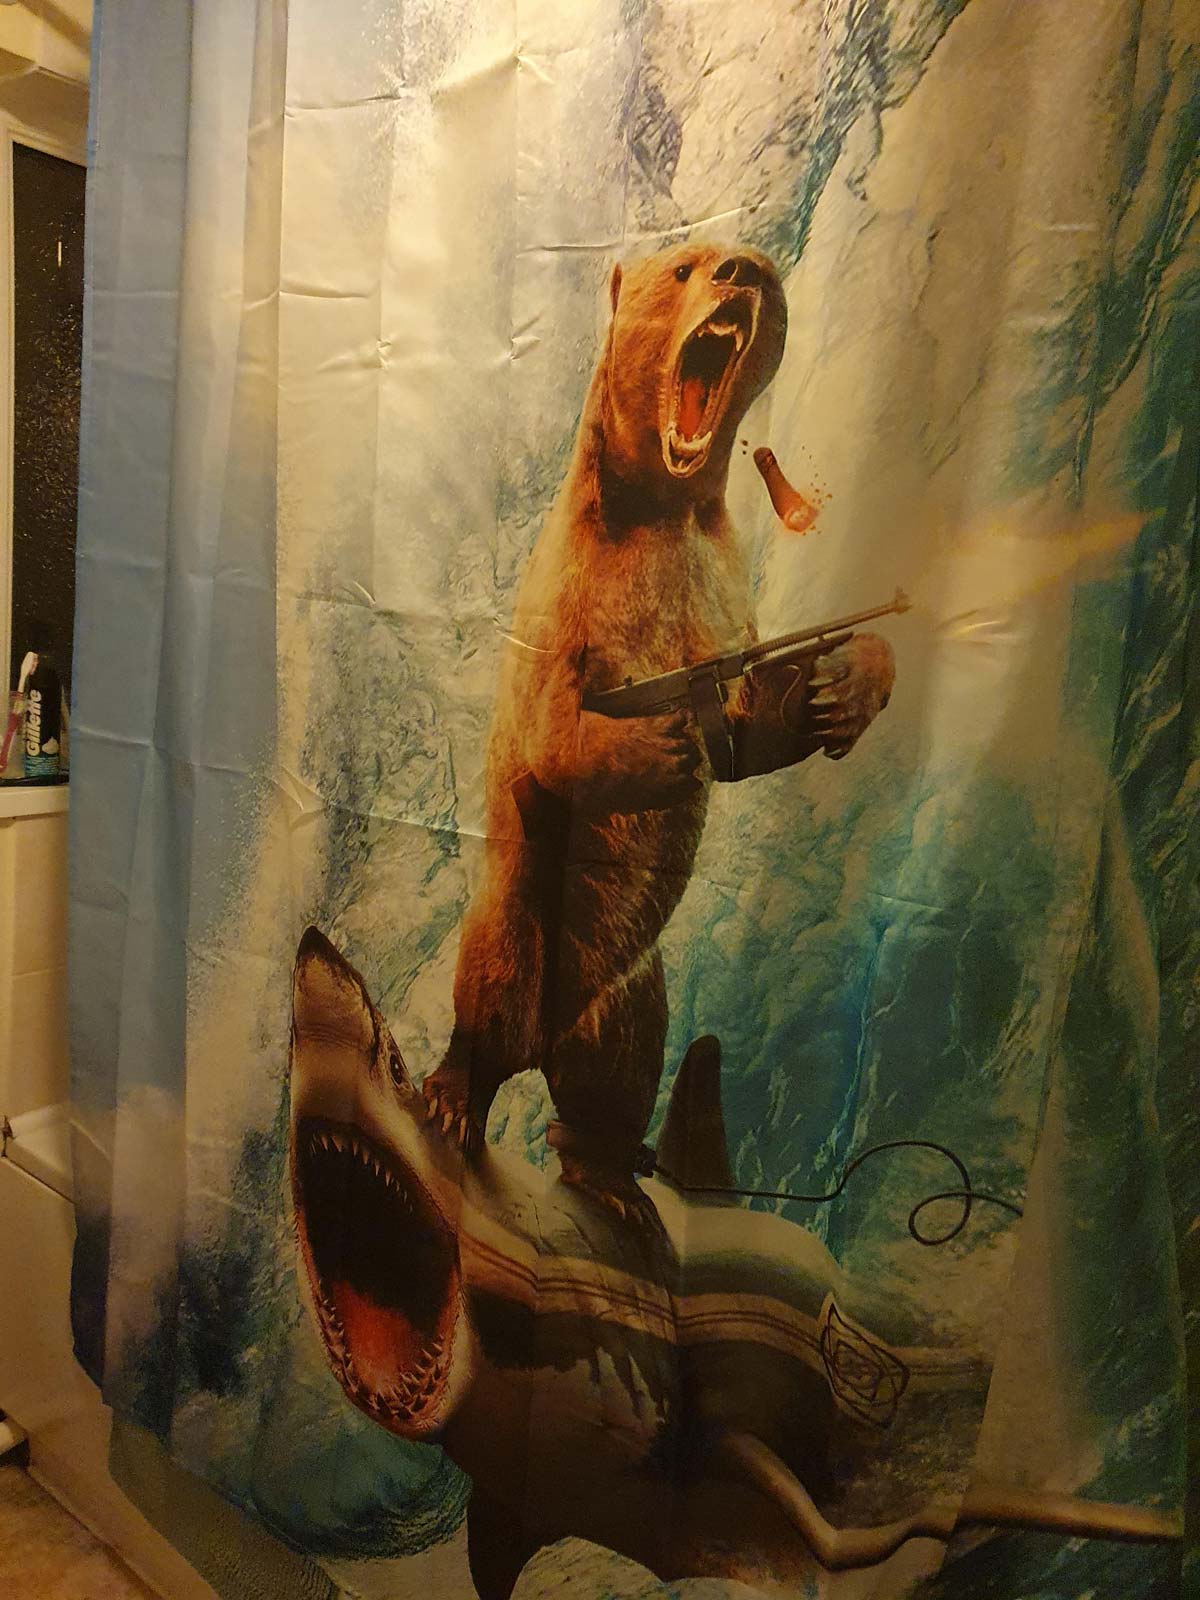 Pretty happy with my new shower curtain